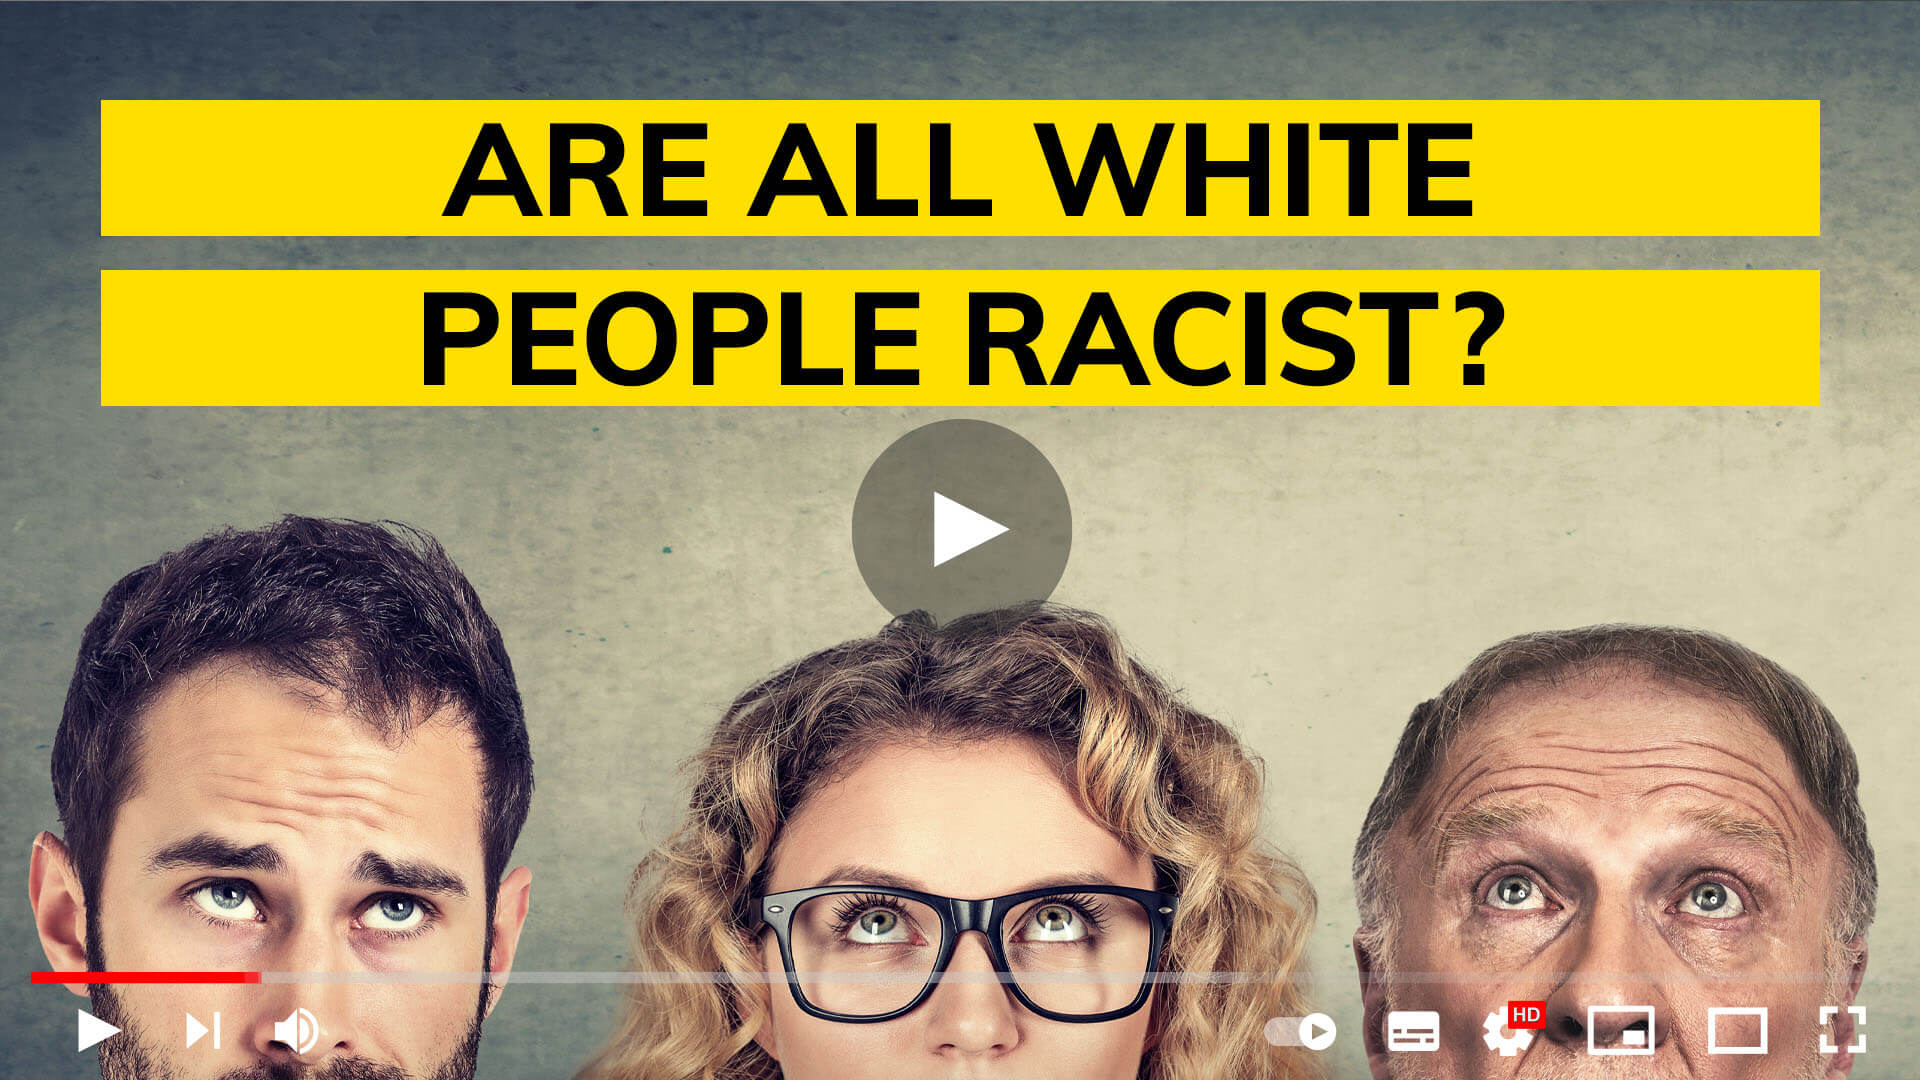 Are all white people racist?